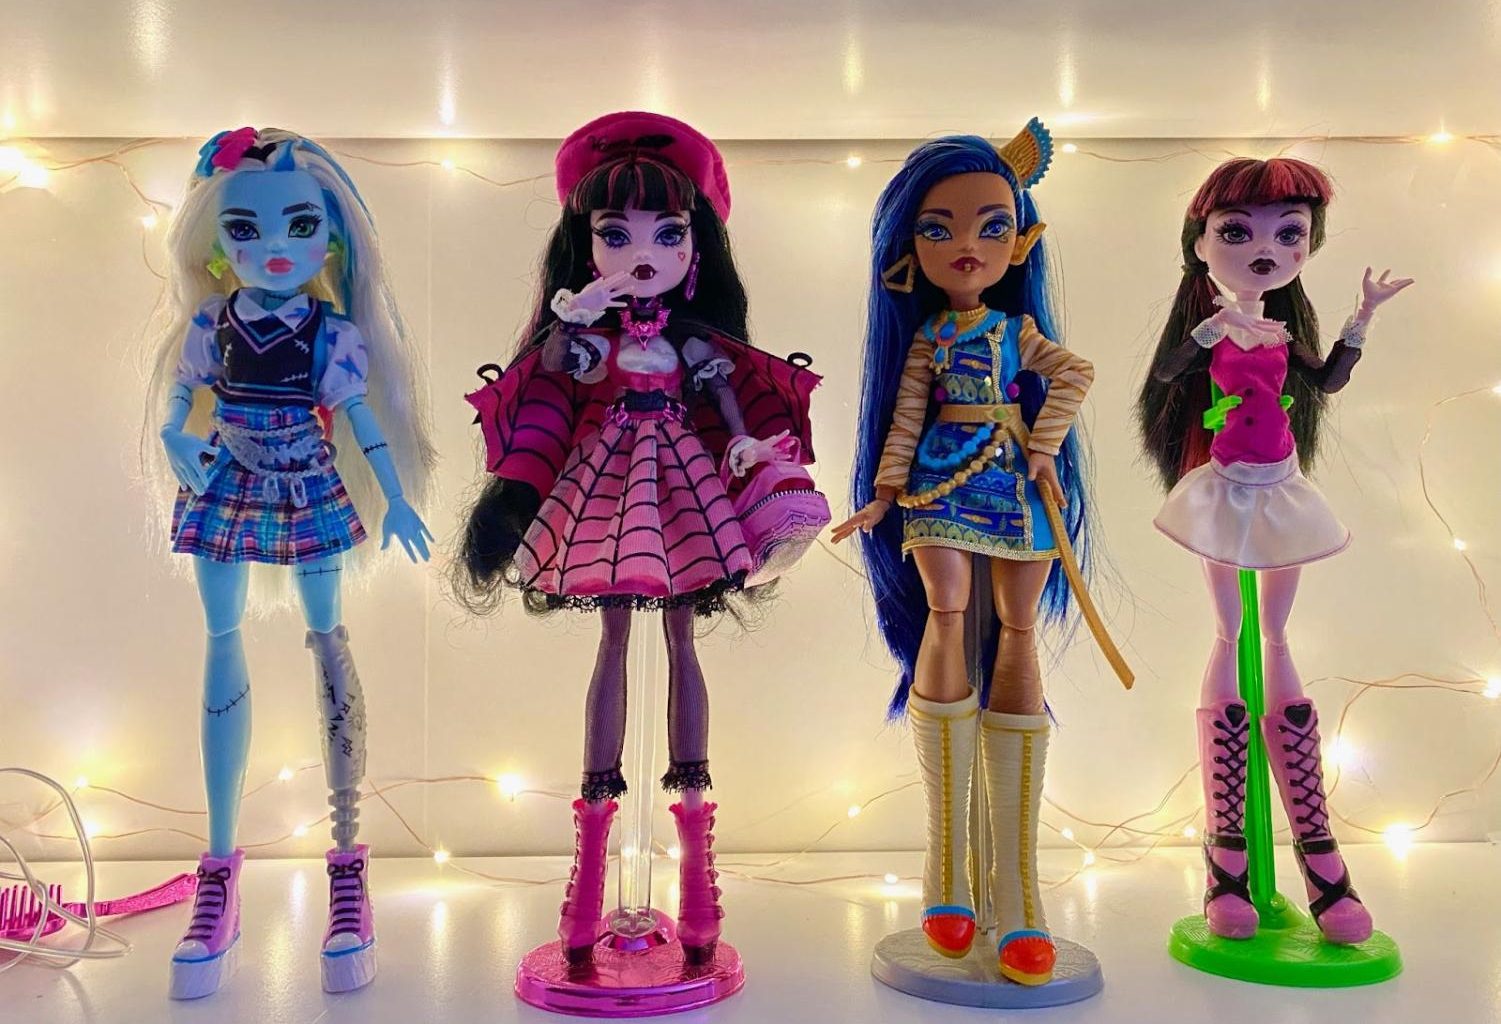 Monster High's representation takes one step forward and two steps